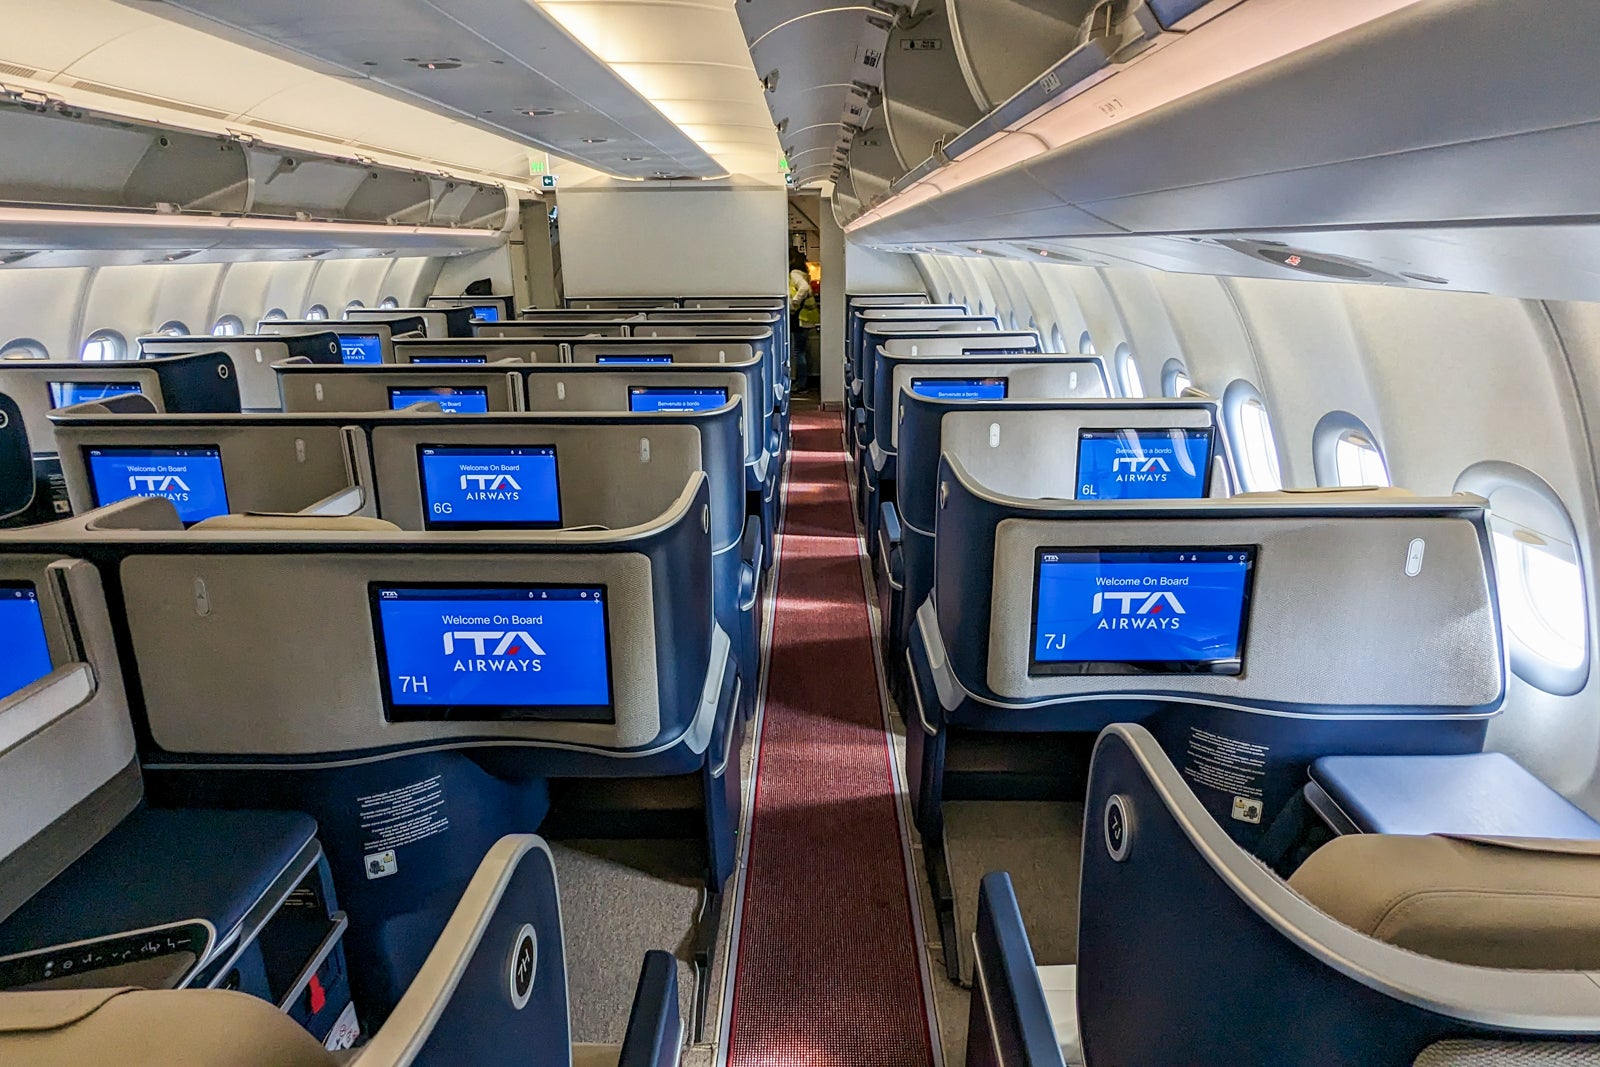 my trip on delta airlines